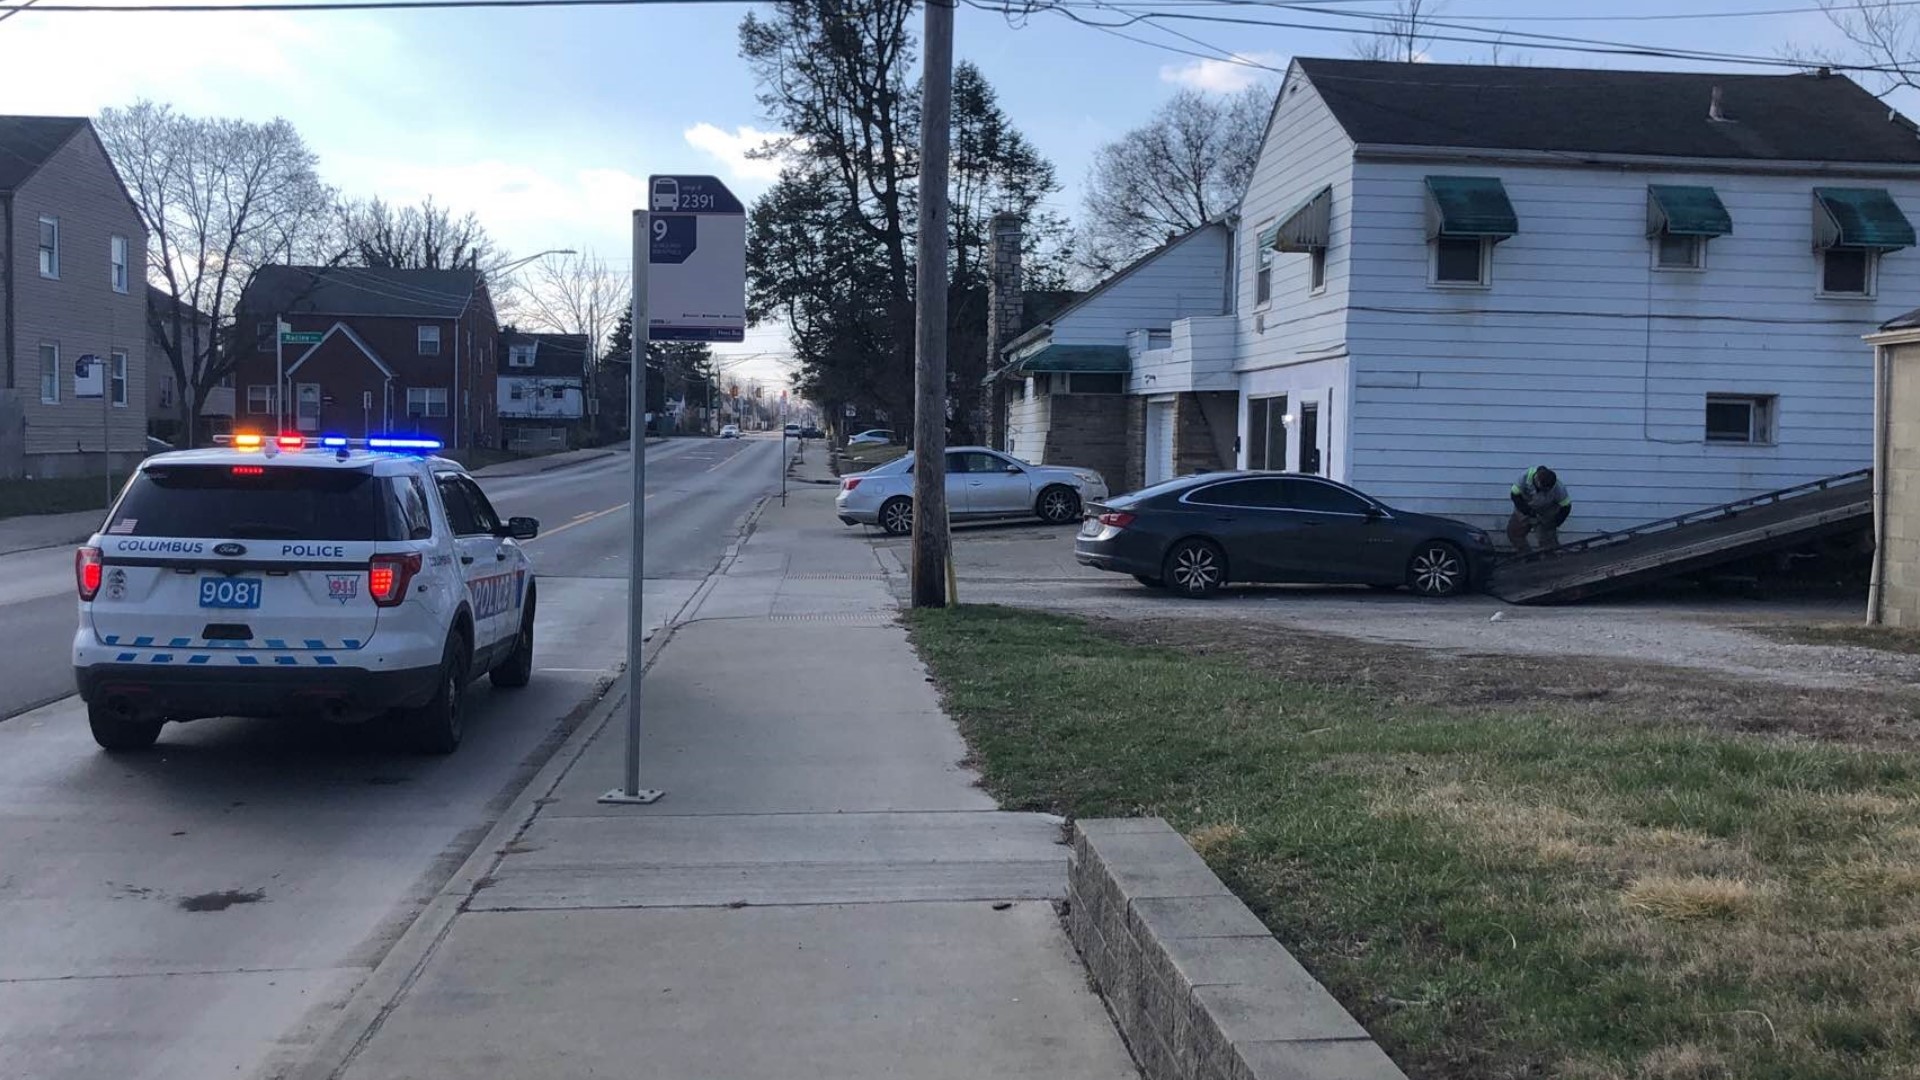 Officers were called to the 2700 block of West Mound Street just after 1:40 p.m. for a reported shooting.